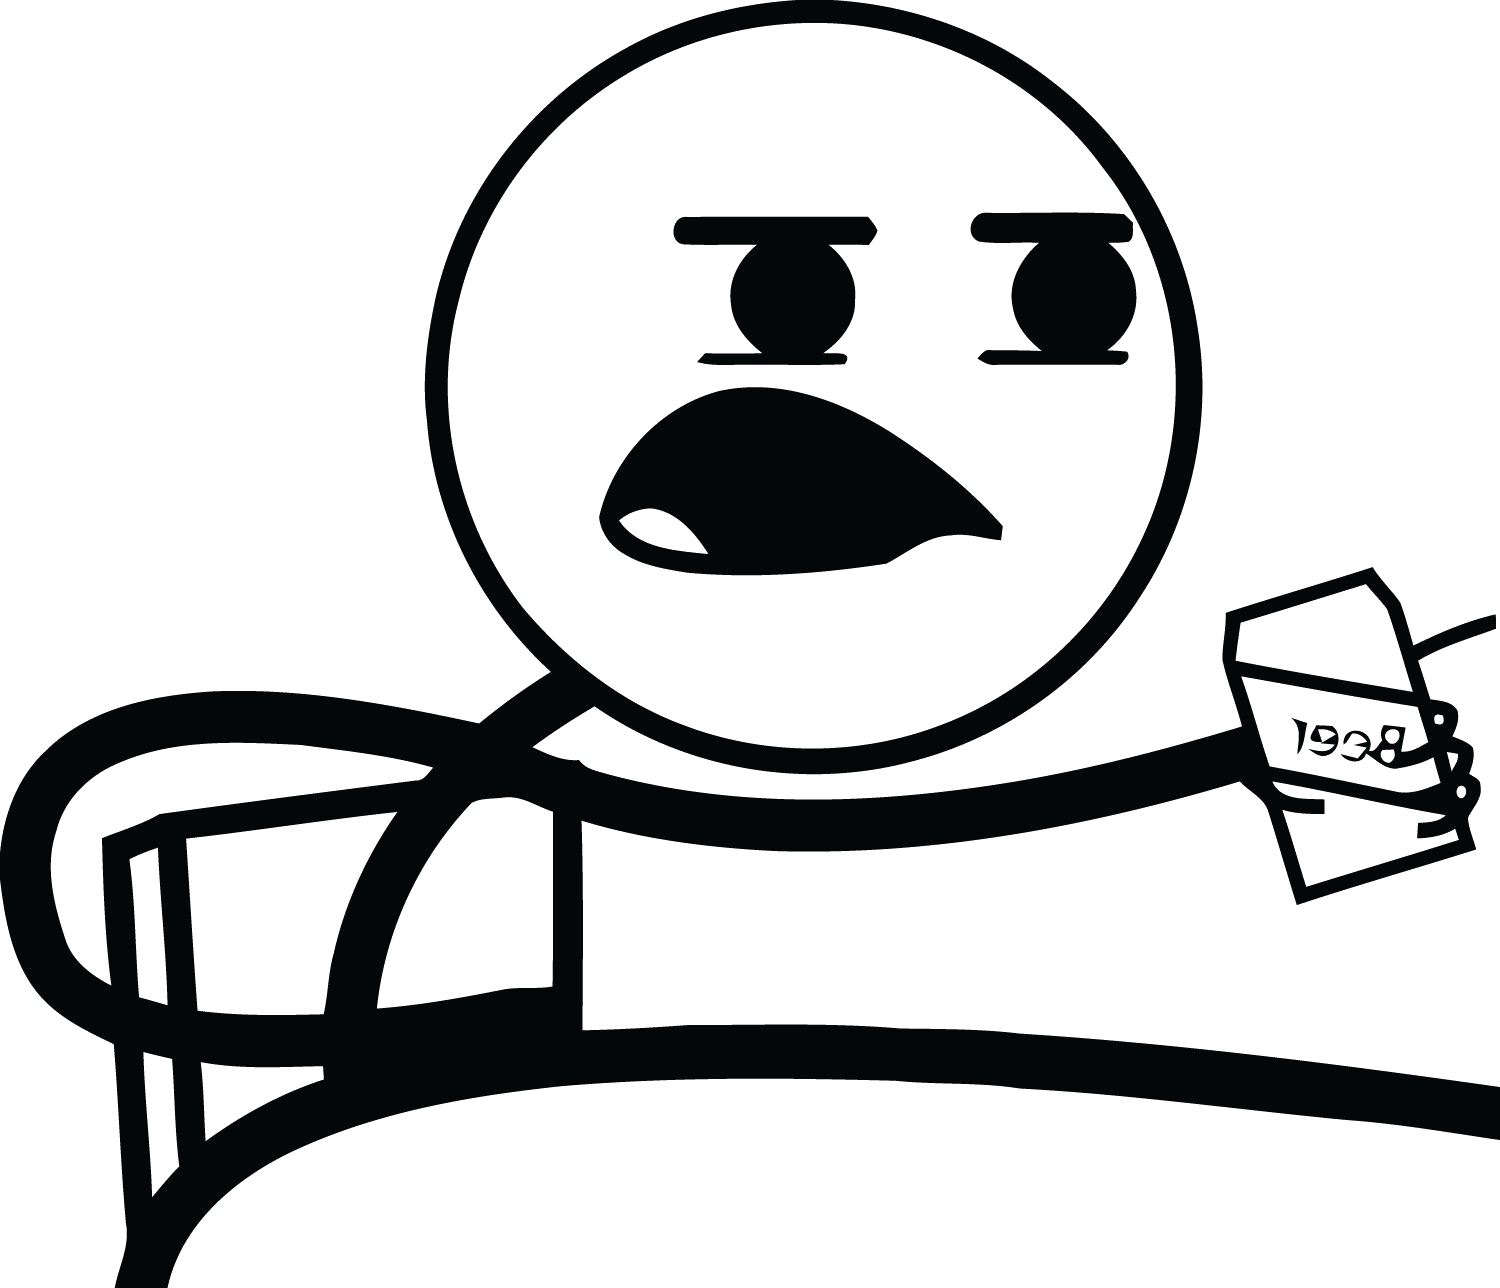 Download Stick Figure Character Unhappy With Cereal1998 | Wallpapers.com